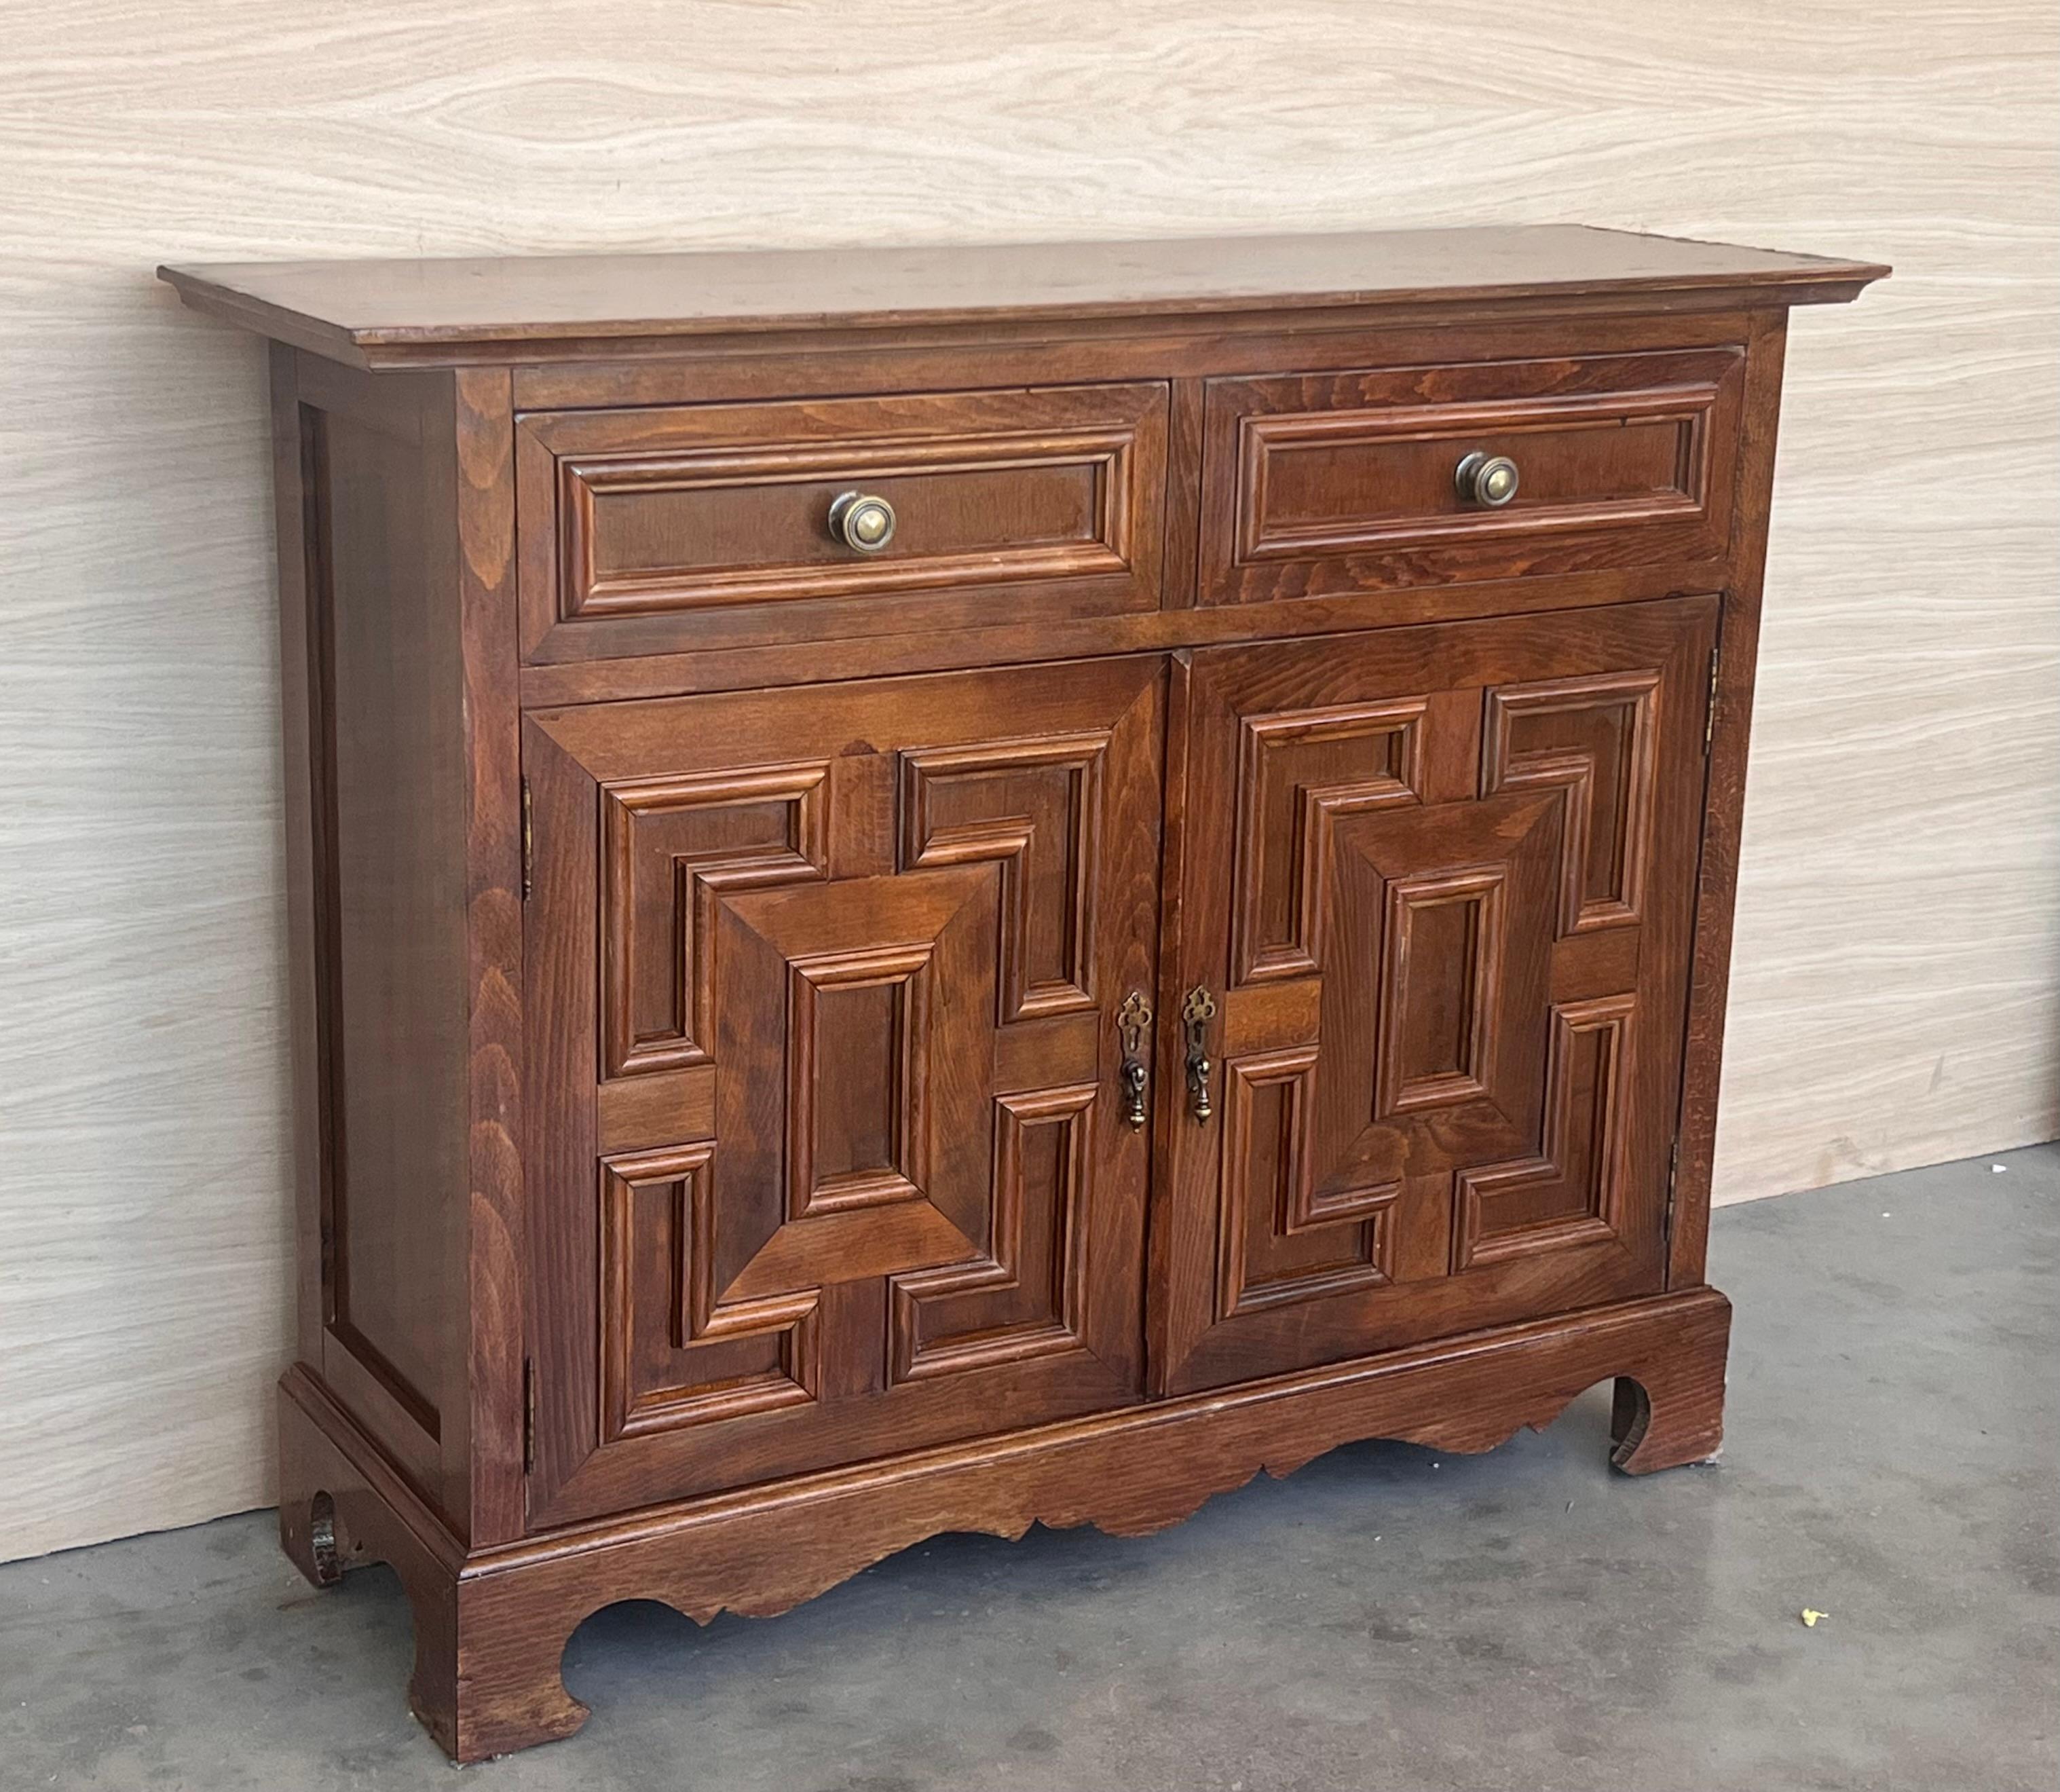 20th Century Spanish Catalan Carved Walnut Chest of Drawers, Highboy or Console, 1920s For Sale